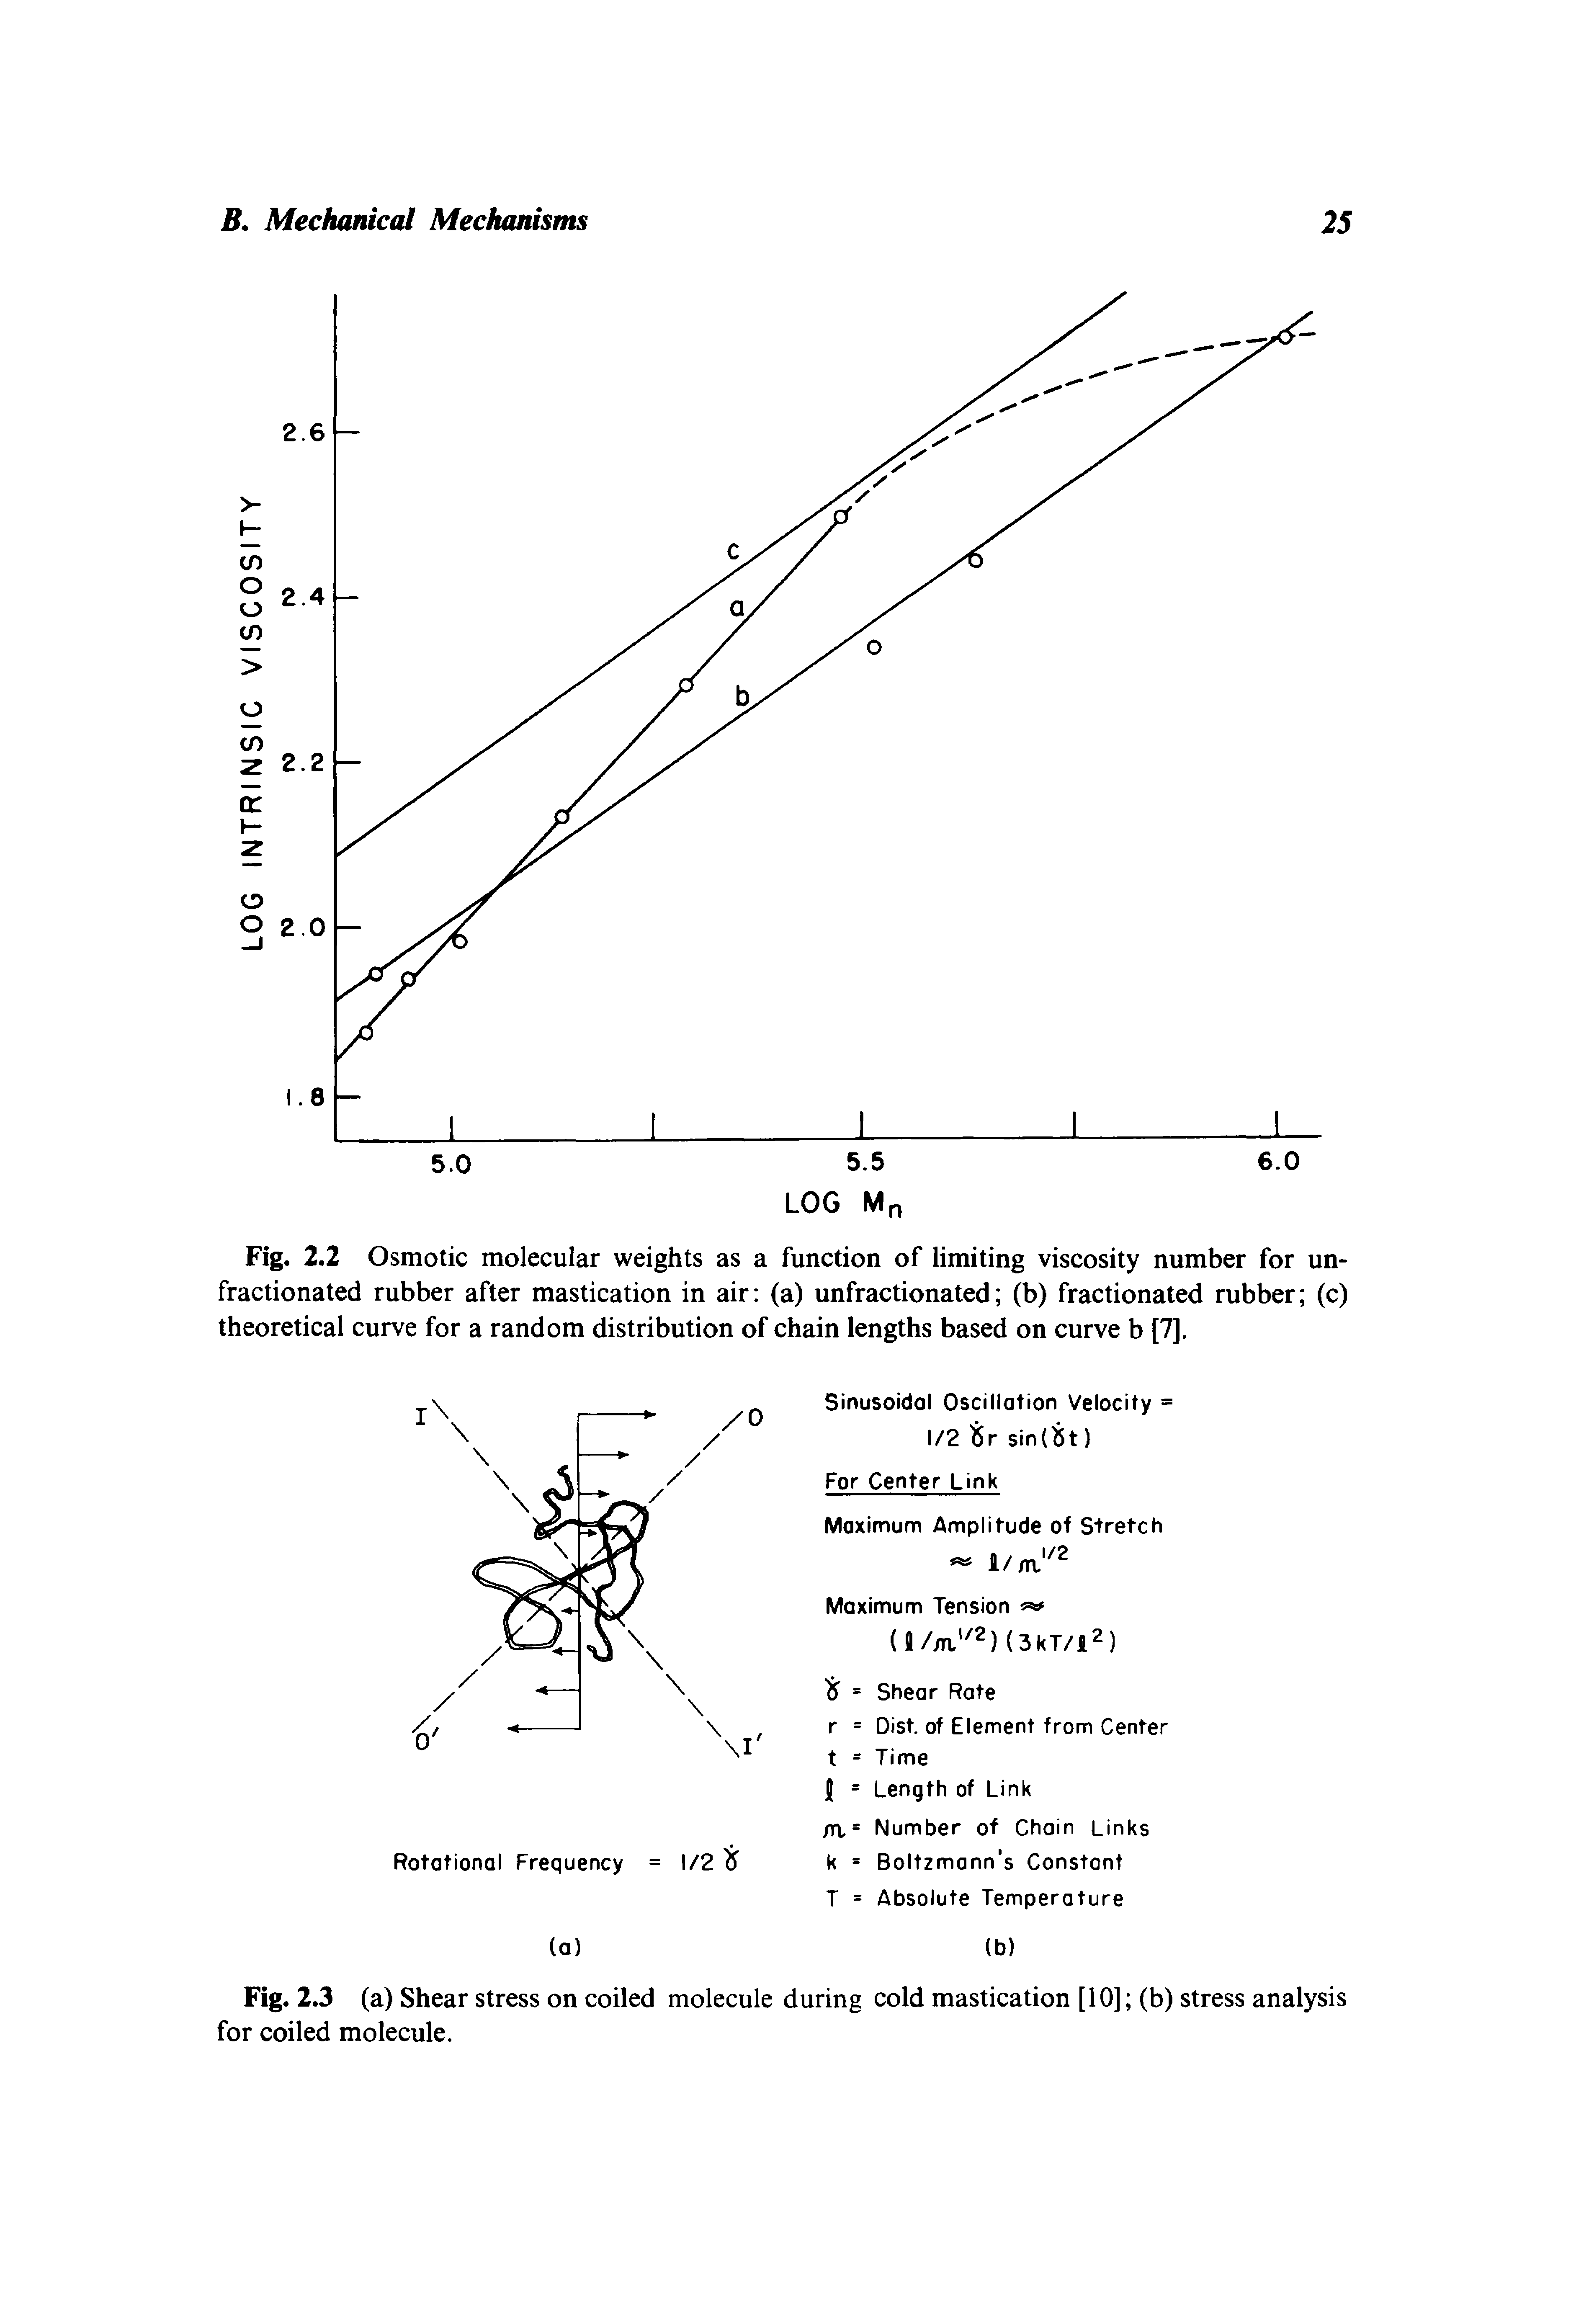 Fig. 2.2 Osmotic molecular weights as a function of limiting viscosity number for unfractionated rubber after mastication in air (a) unfractionated (b) fractionated rubber (c) theoretical curve for a random distribution of chain lengths based on curve b [7].